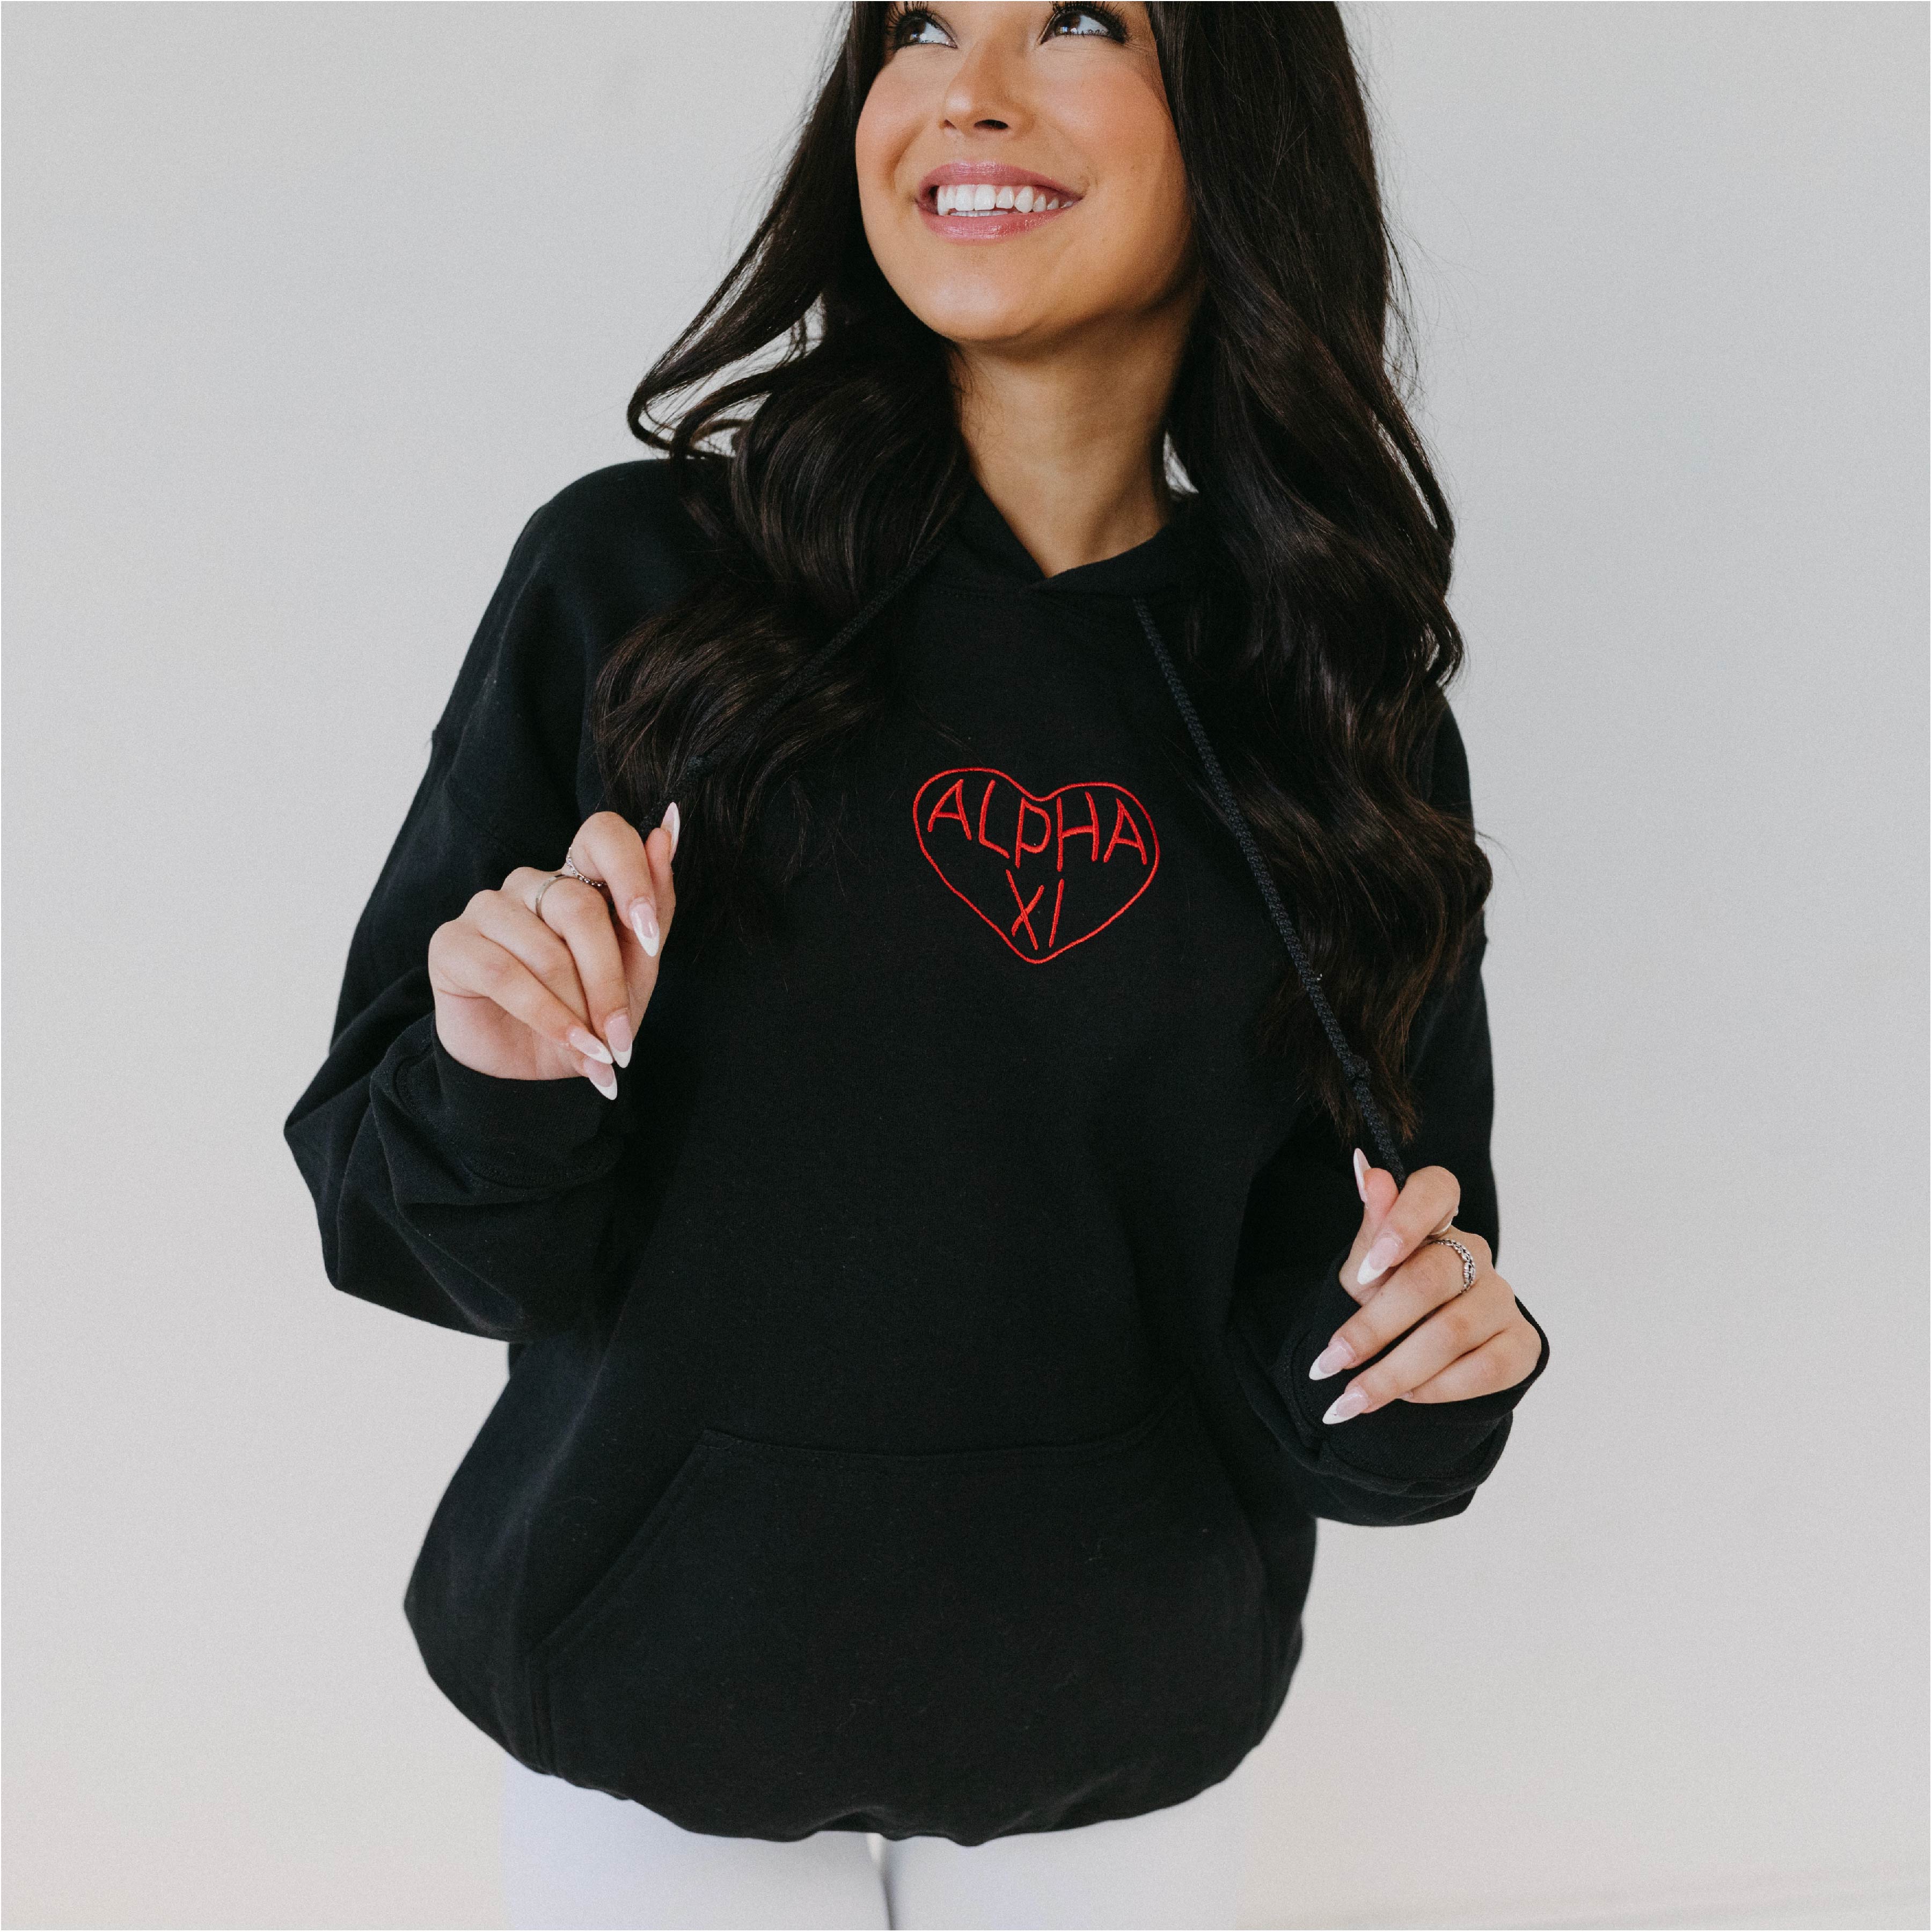 red eyes heart clothing brand｜TikTok Search